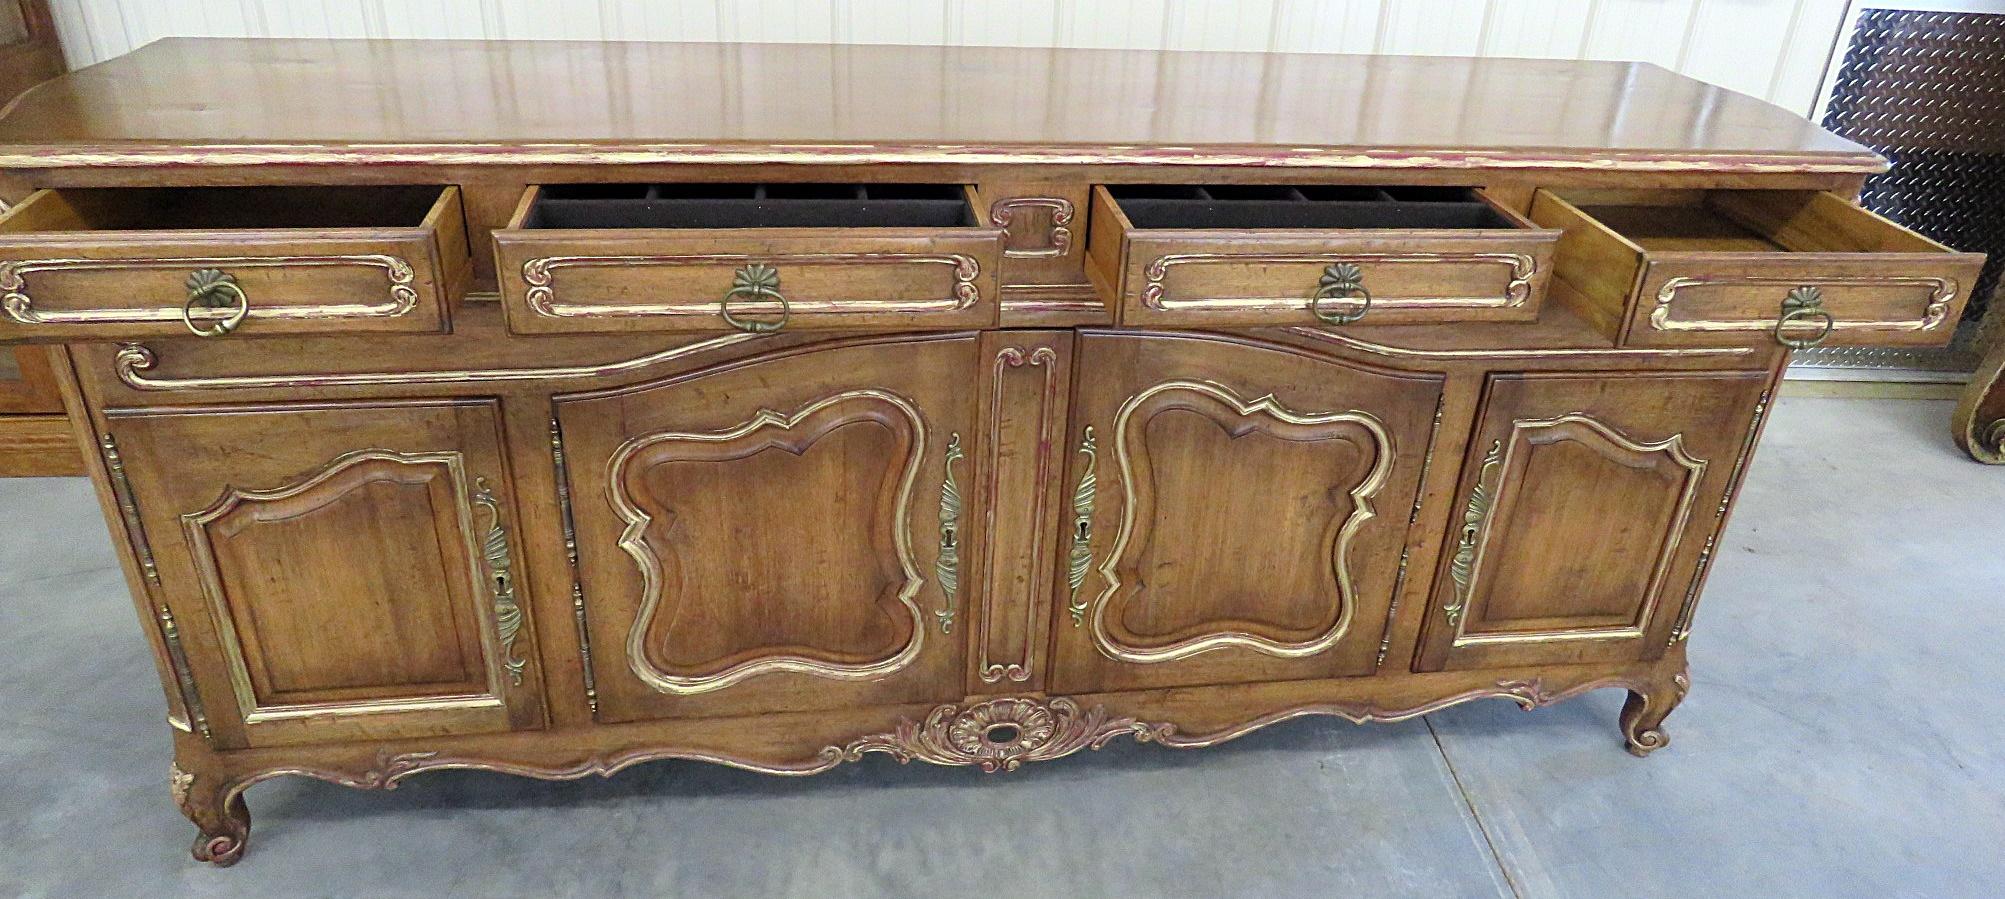 Auffray Attributed Antique Style Louis XV Country French Sideboard Buffet Server 1